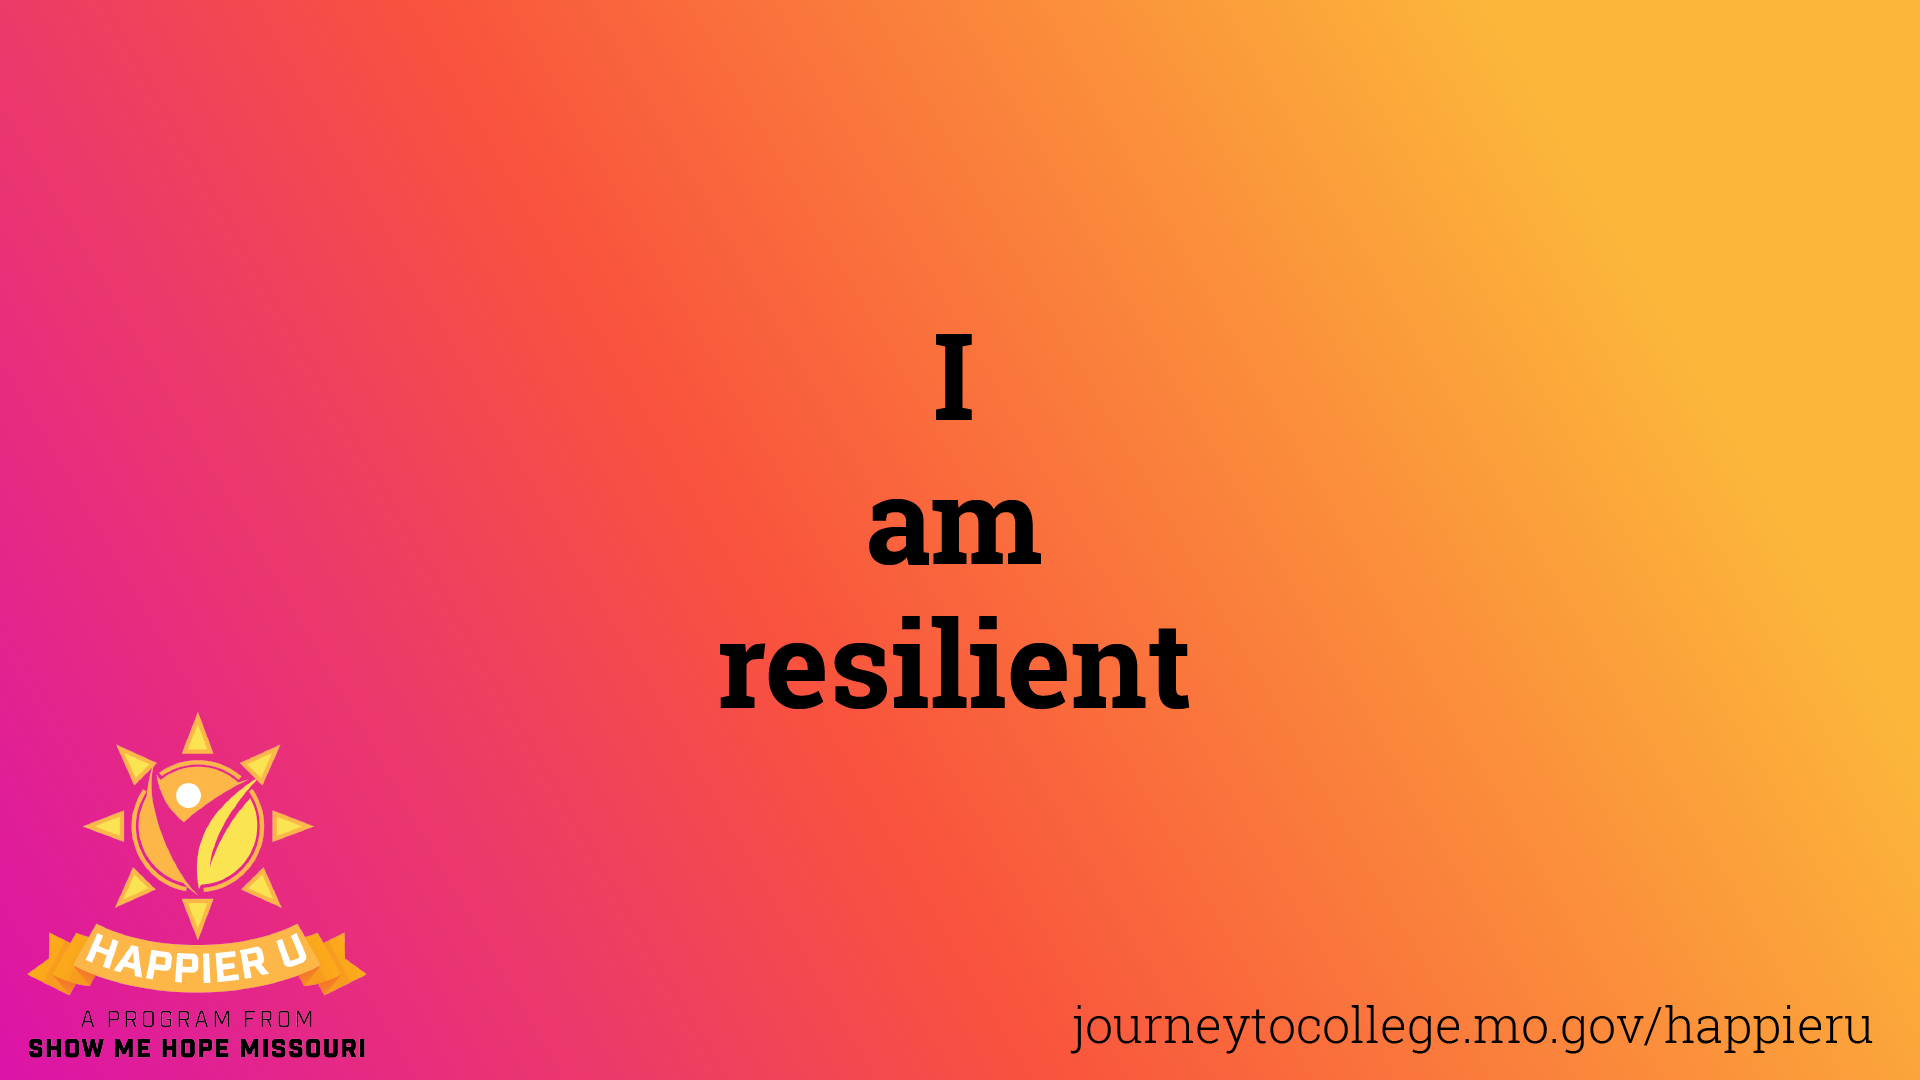 "I am resilient"